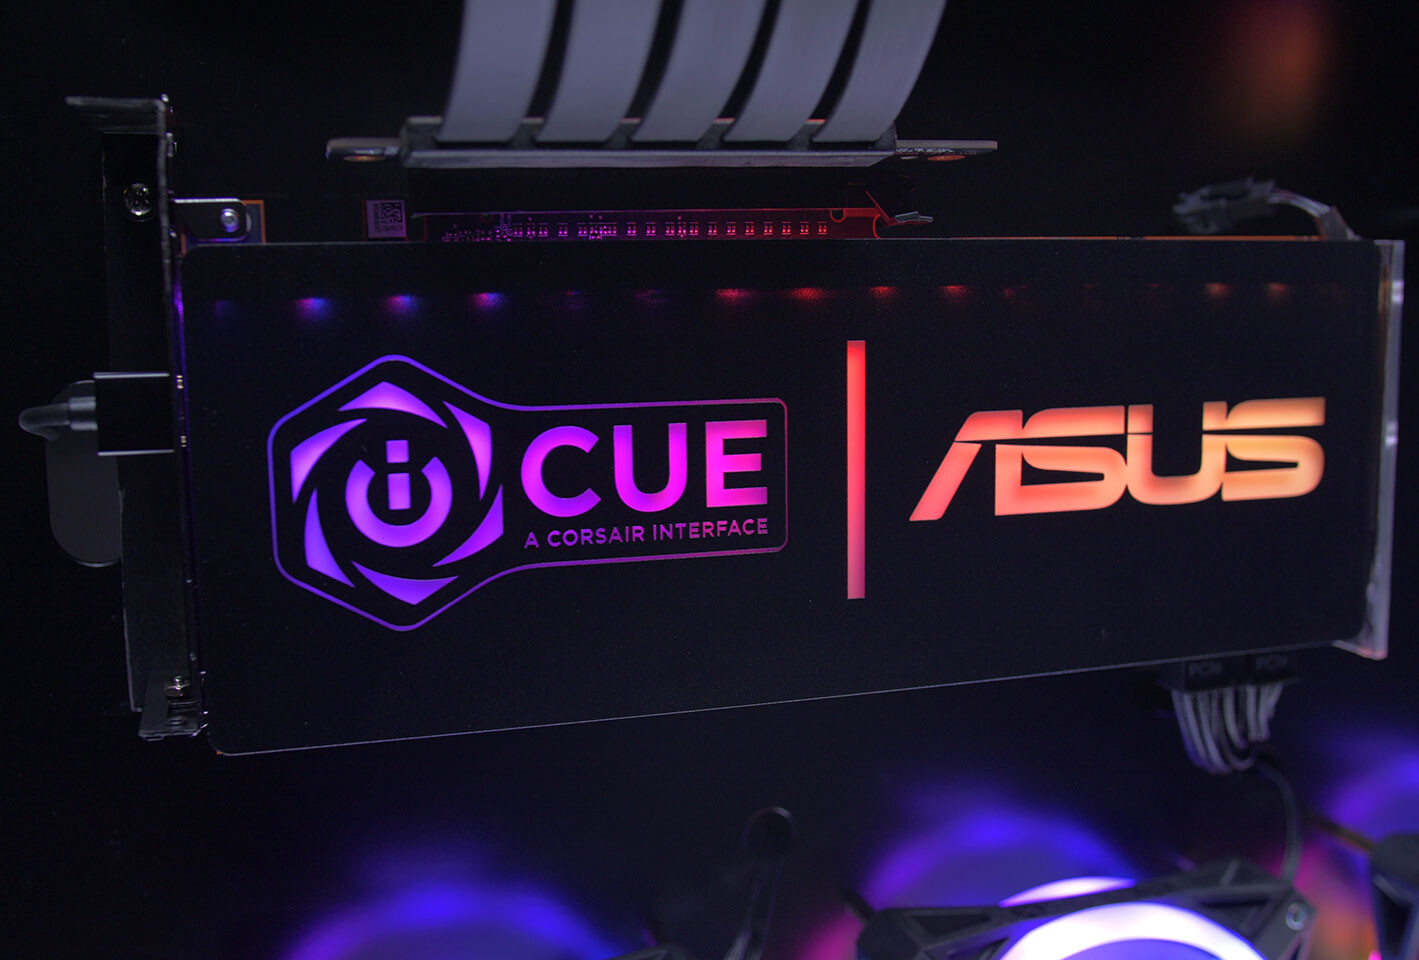 CORSAIR Announces Lighting Control for Aura Sync RGB Motherboards in iCUE Software |